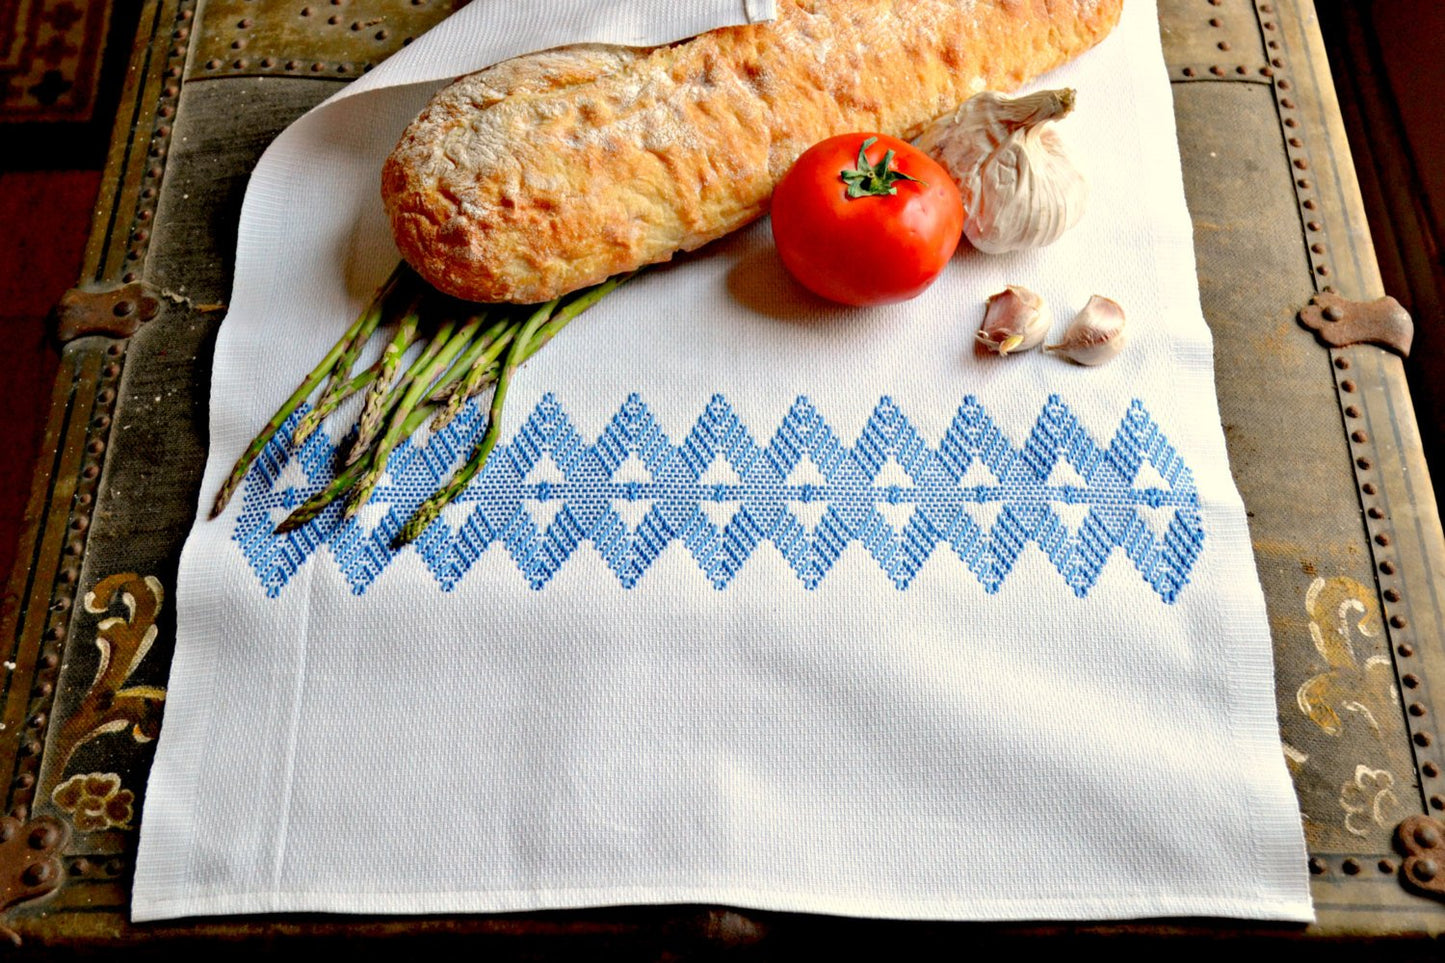 Tea towel hand embroidered with traditional diamond pattern in blue wrapping produce and bread